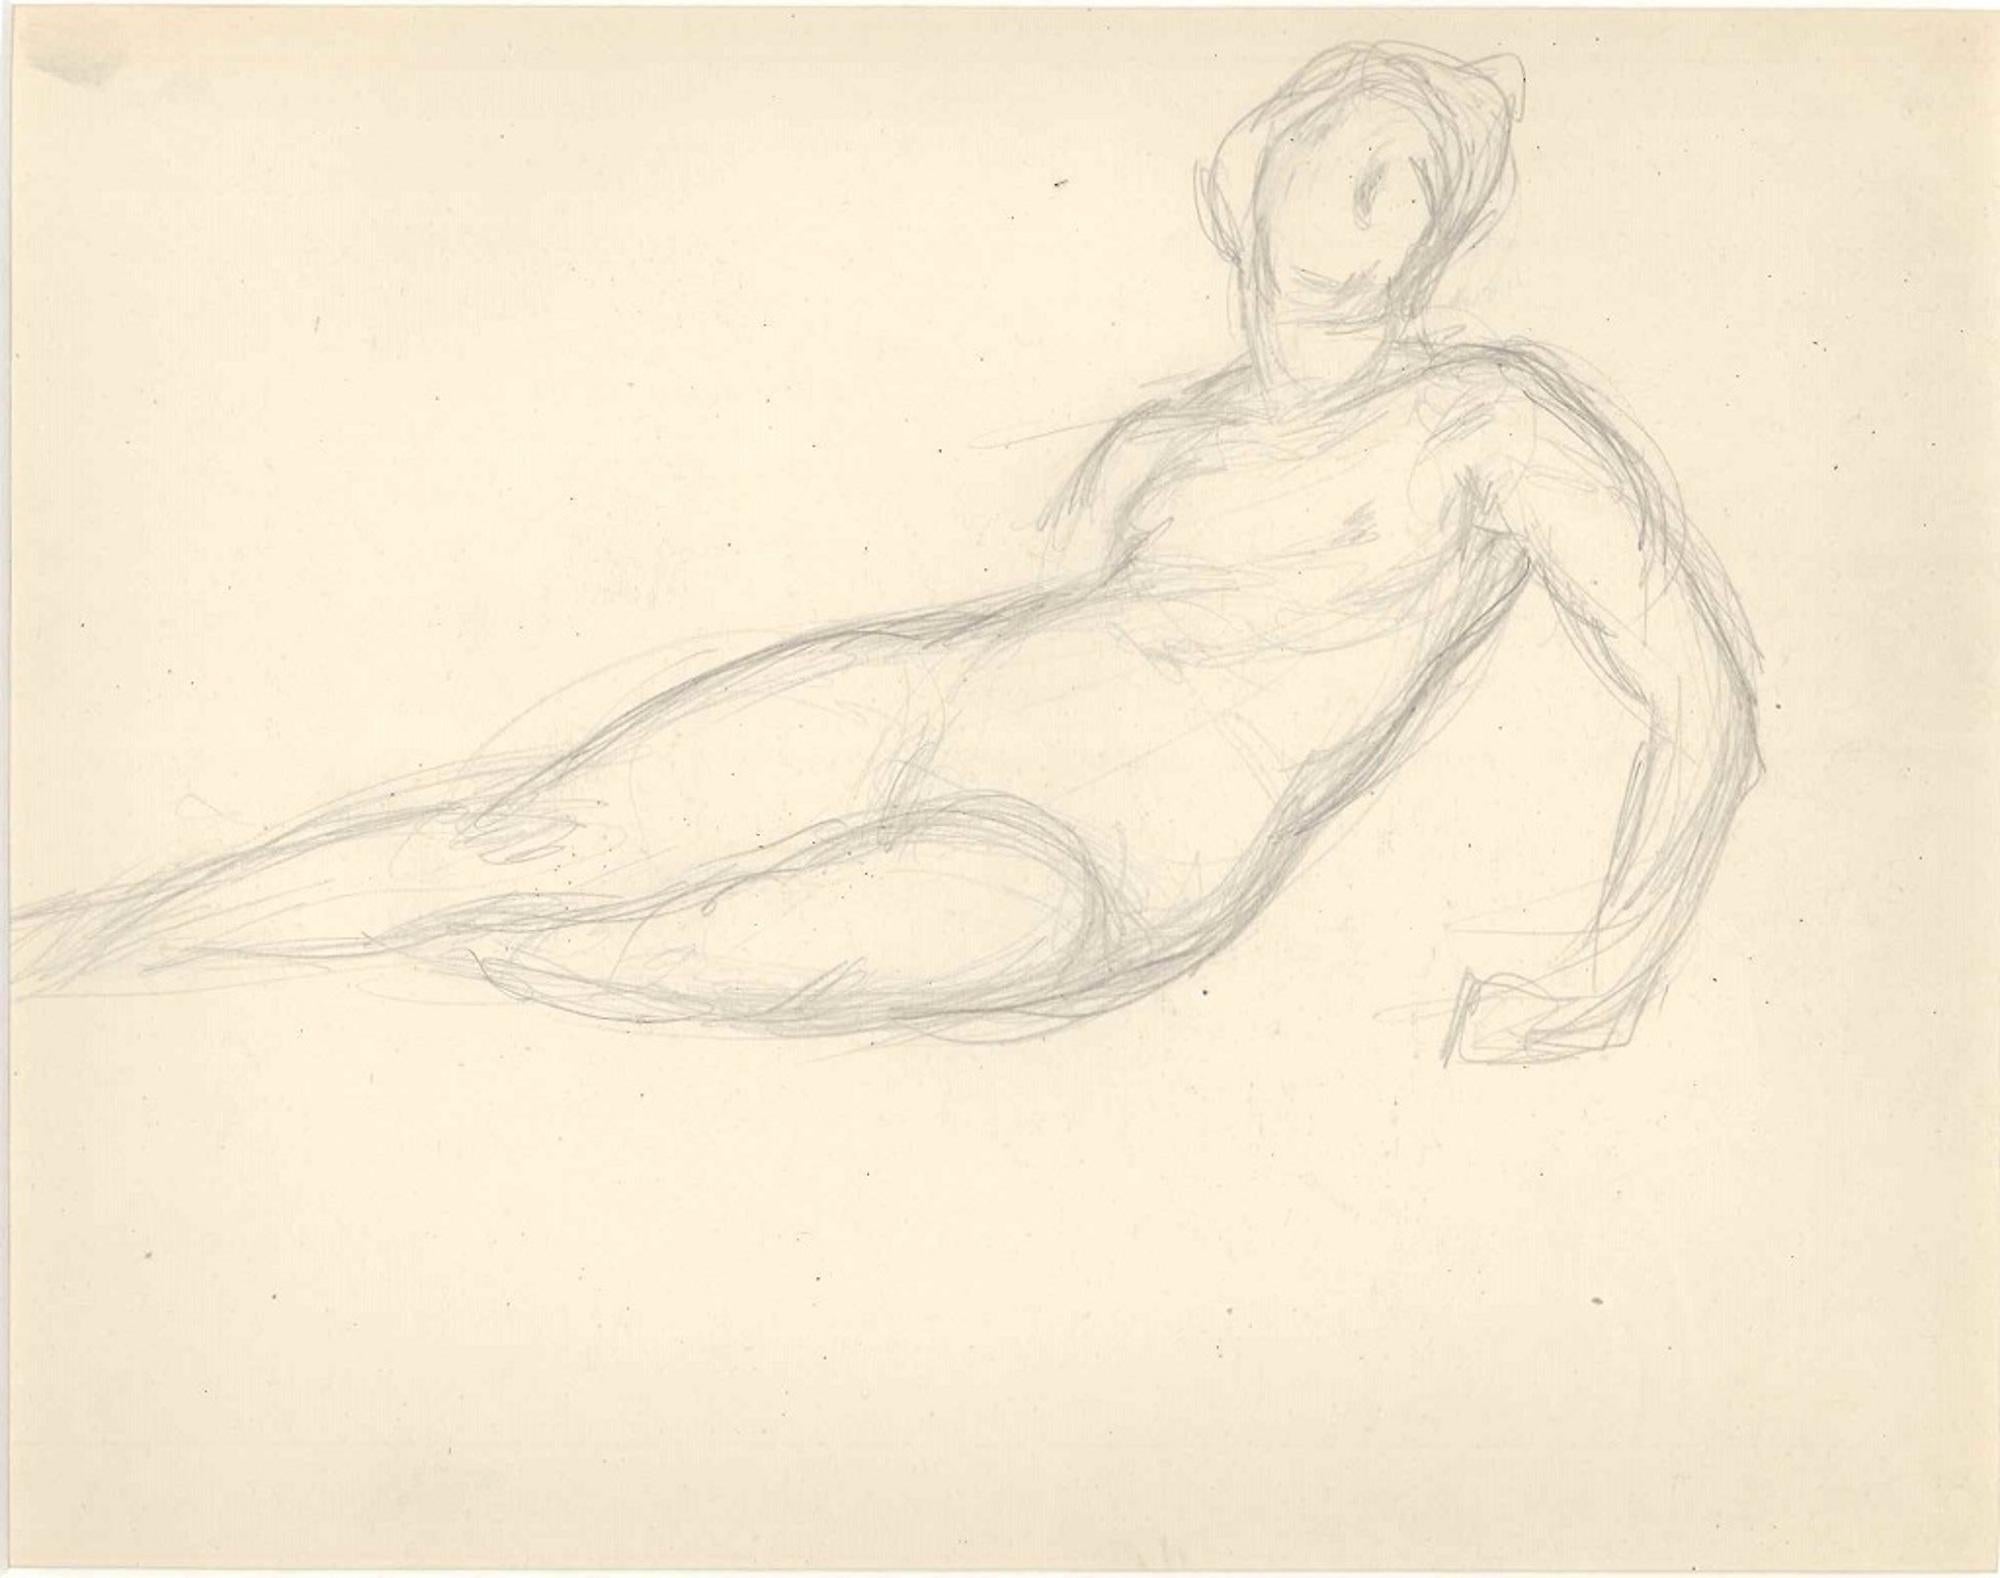 Unknown Figurative Art - Lying Female Nude   - Original Drawing - Early 20th Century